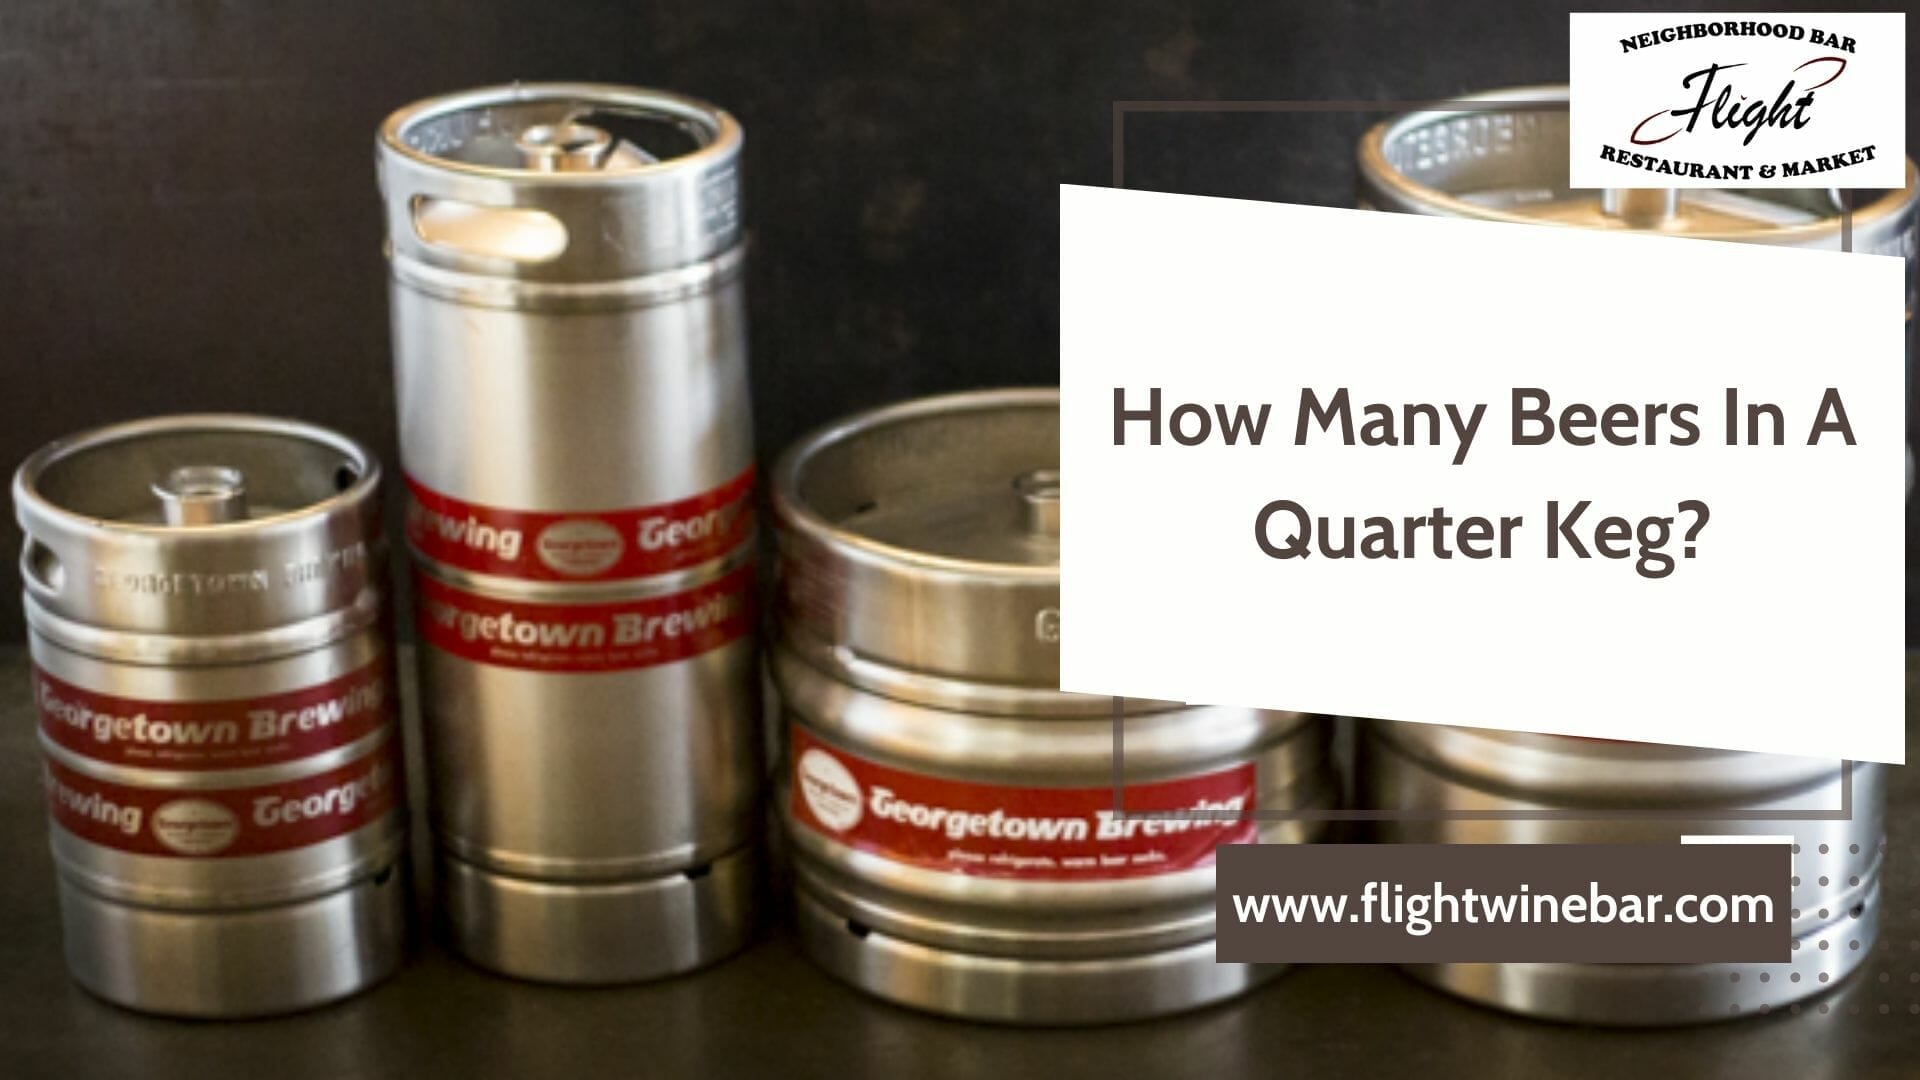 How Many Beers In A Quarter Keg